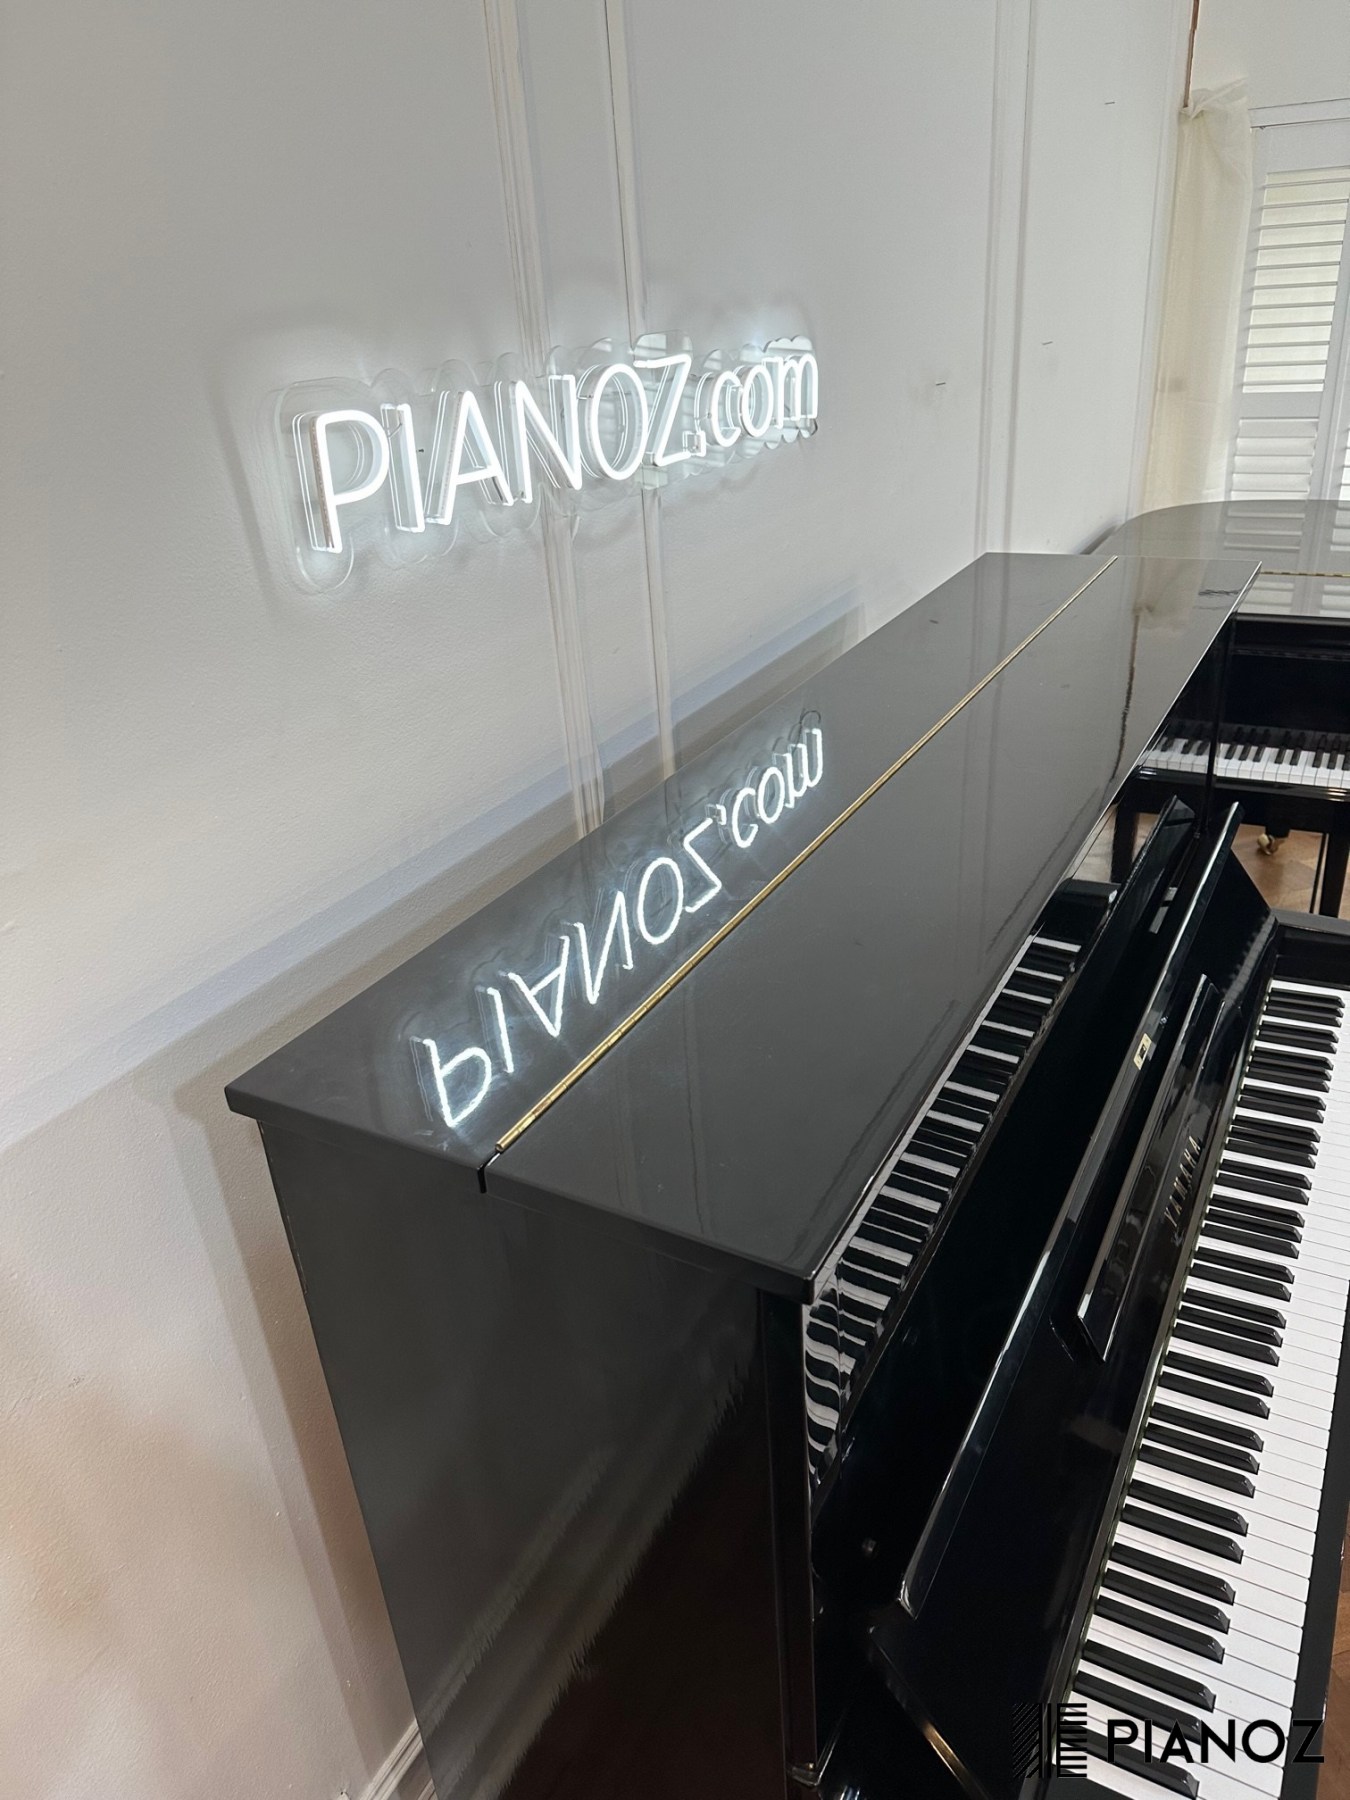 Yamaha U3 Silent Upright Piano piano for sale in UK